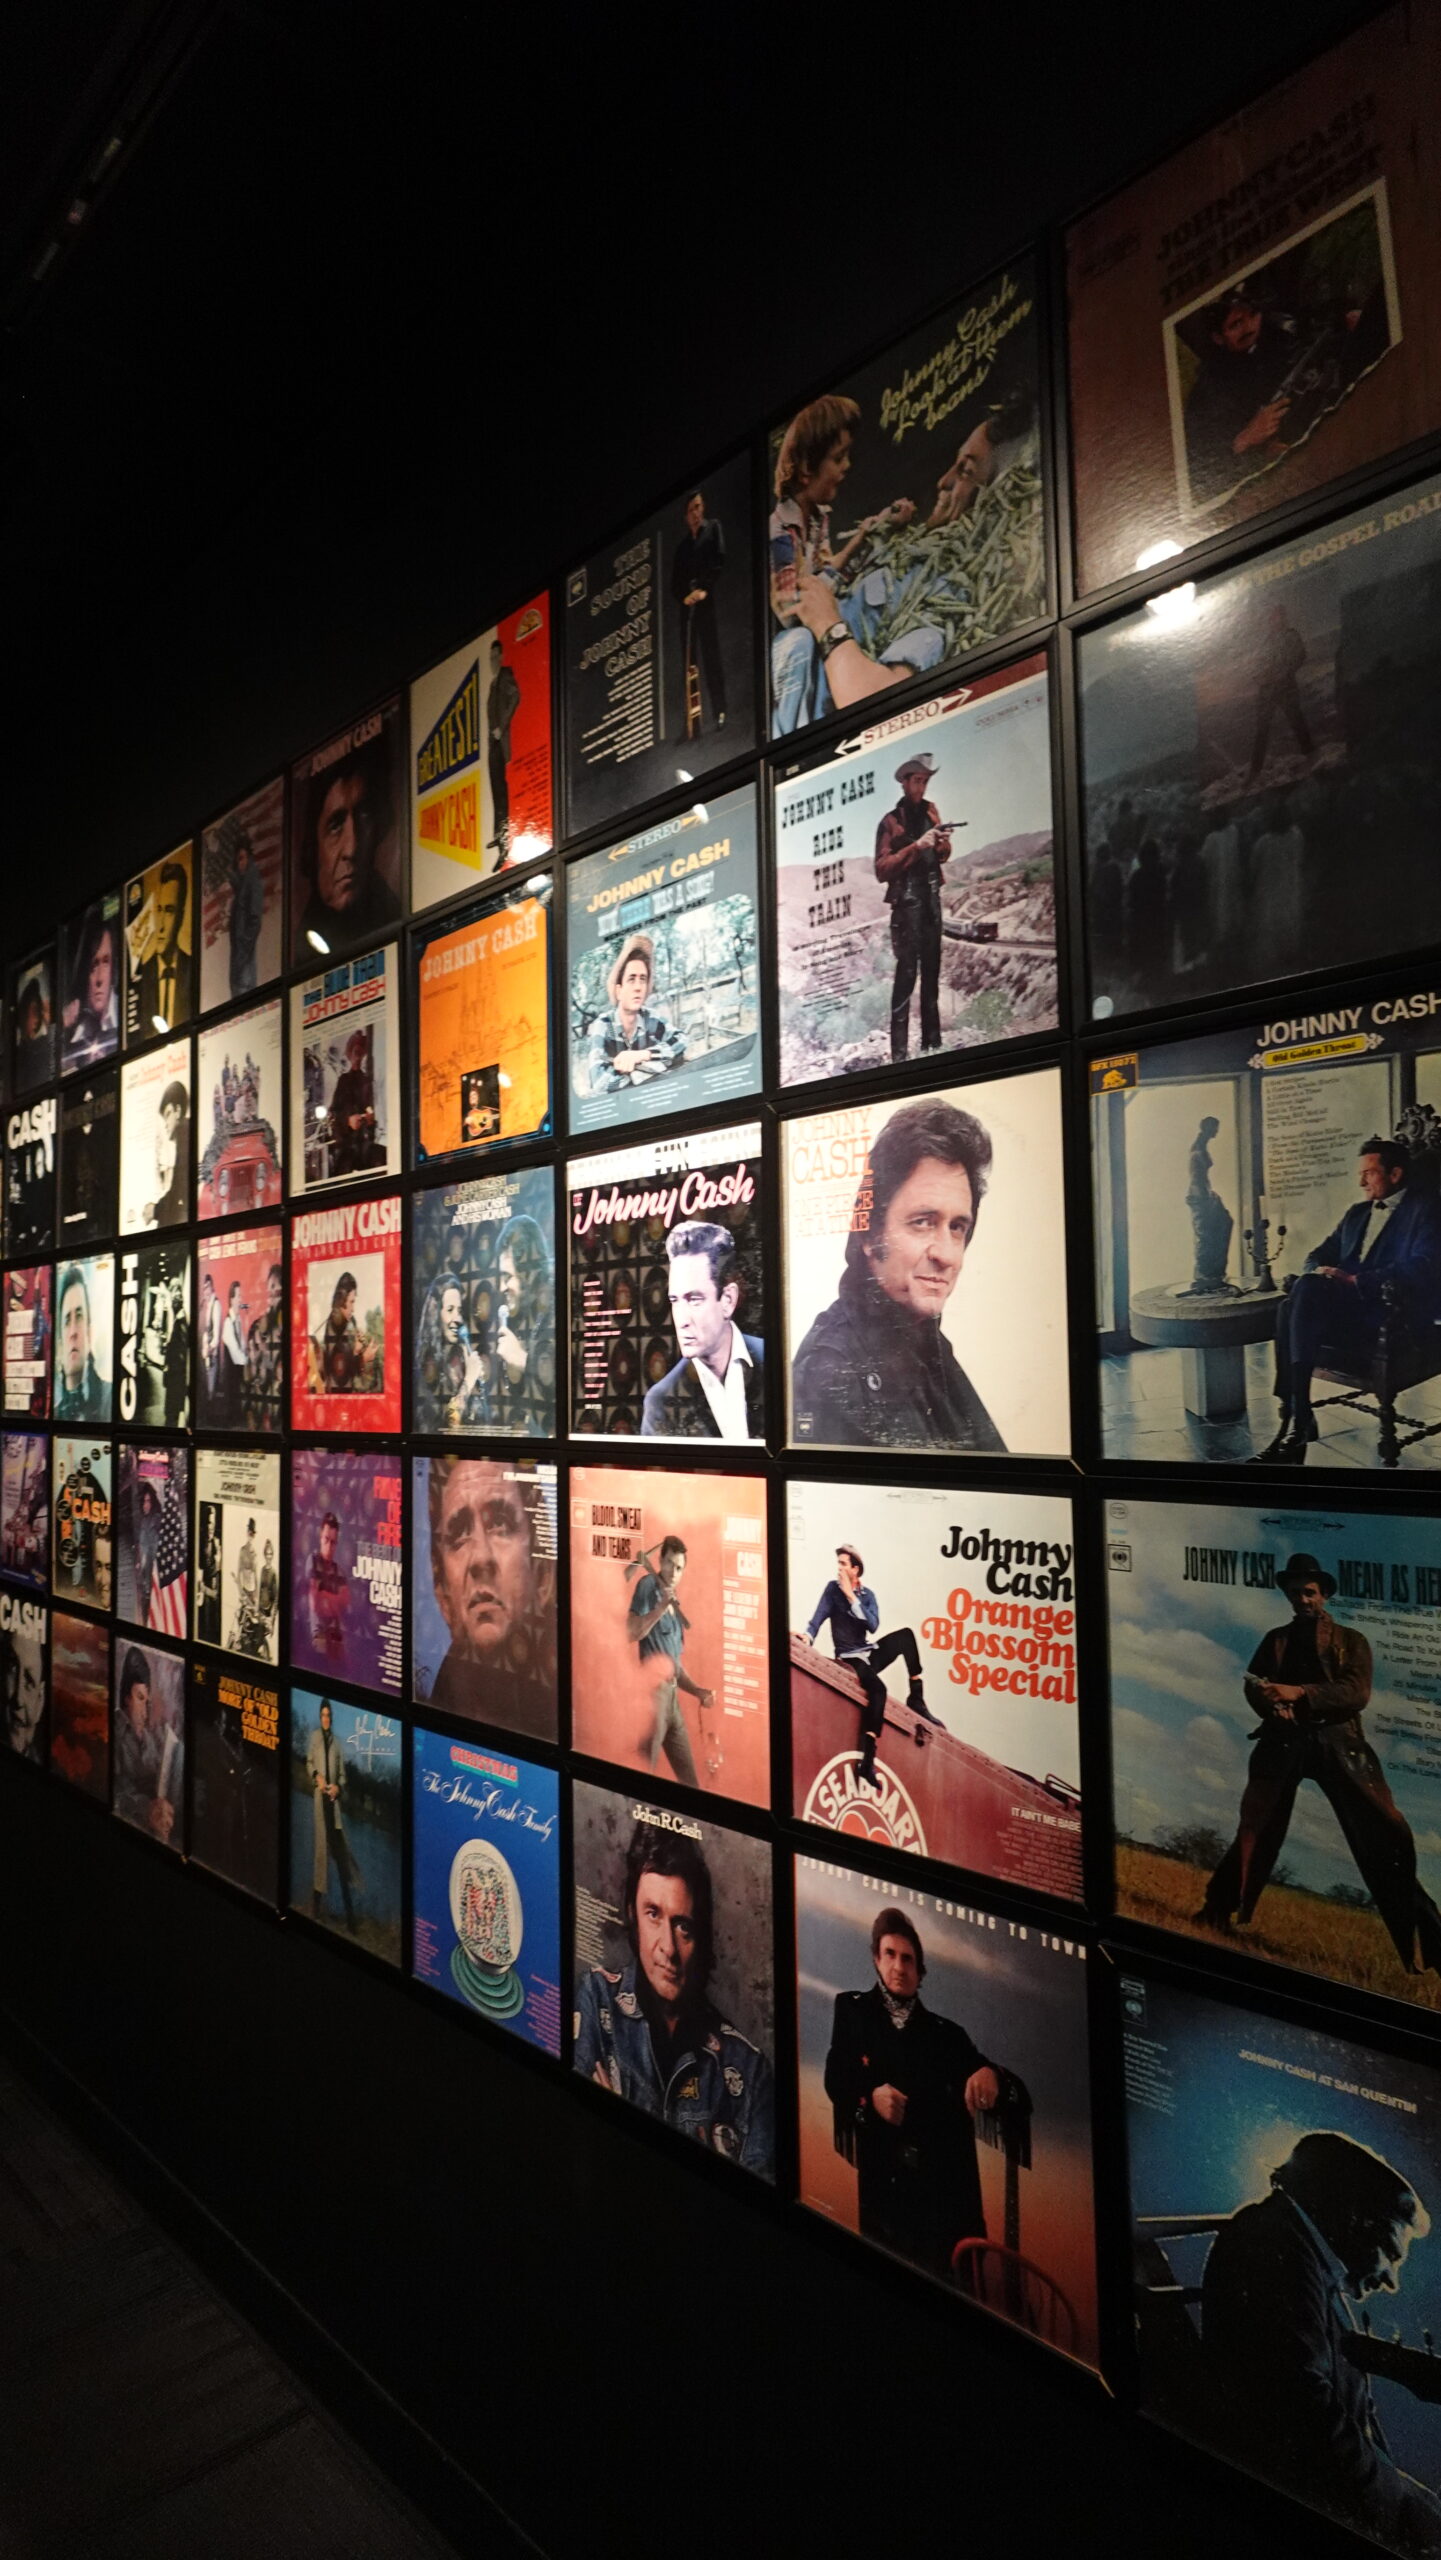 Johnny Cash museum in Nashville. Shows a wall of albums